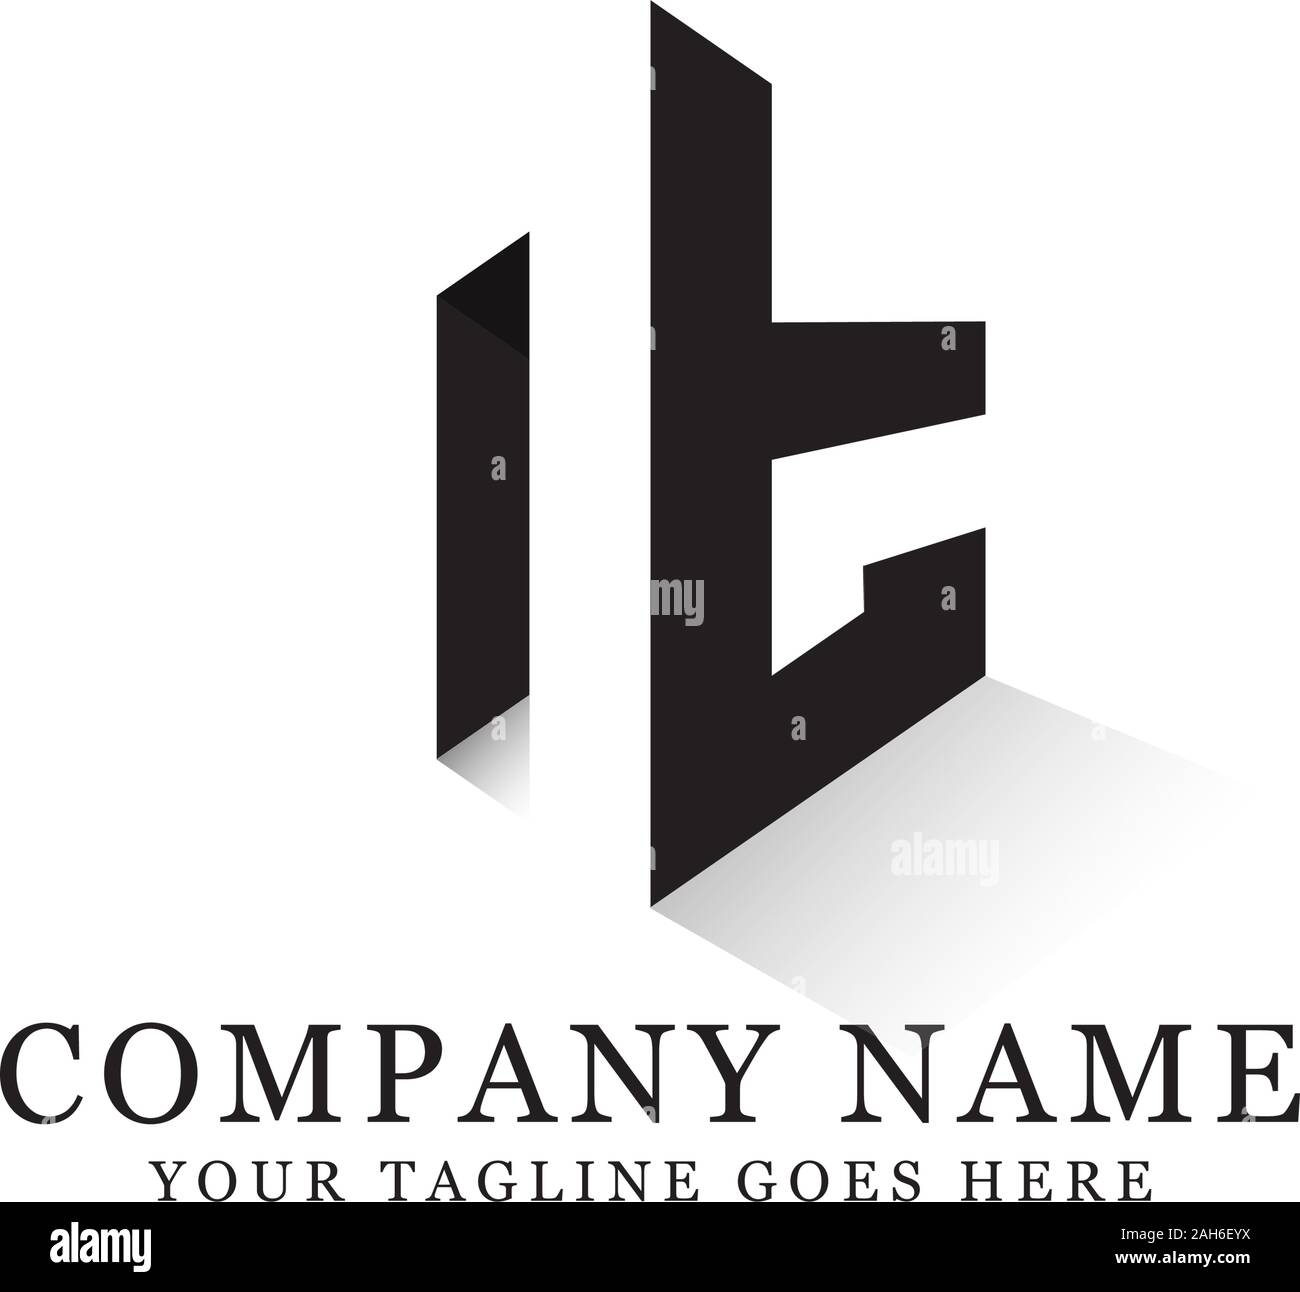 nt initial logo inspiration, negative space letter logo designs Stock Vector